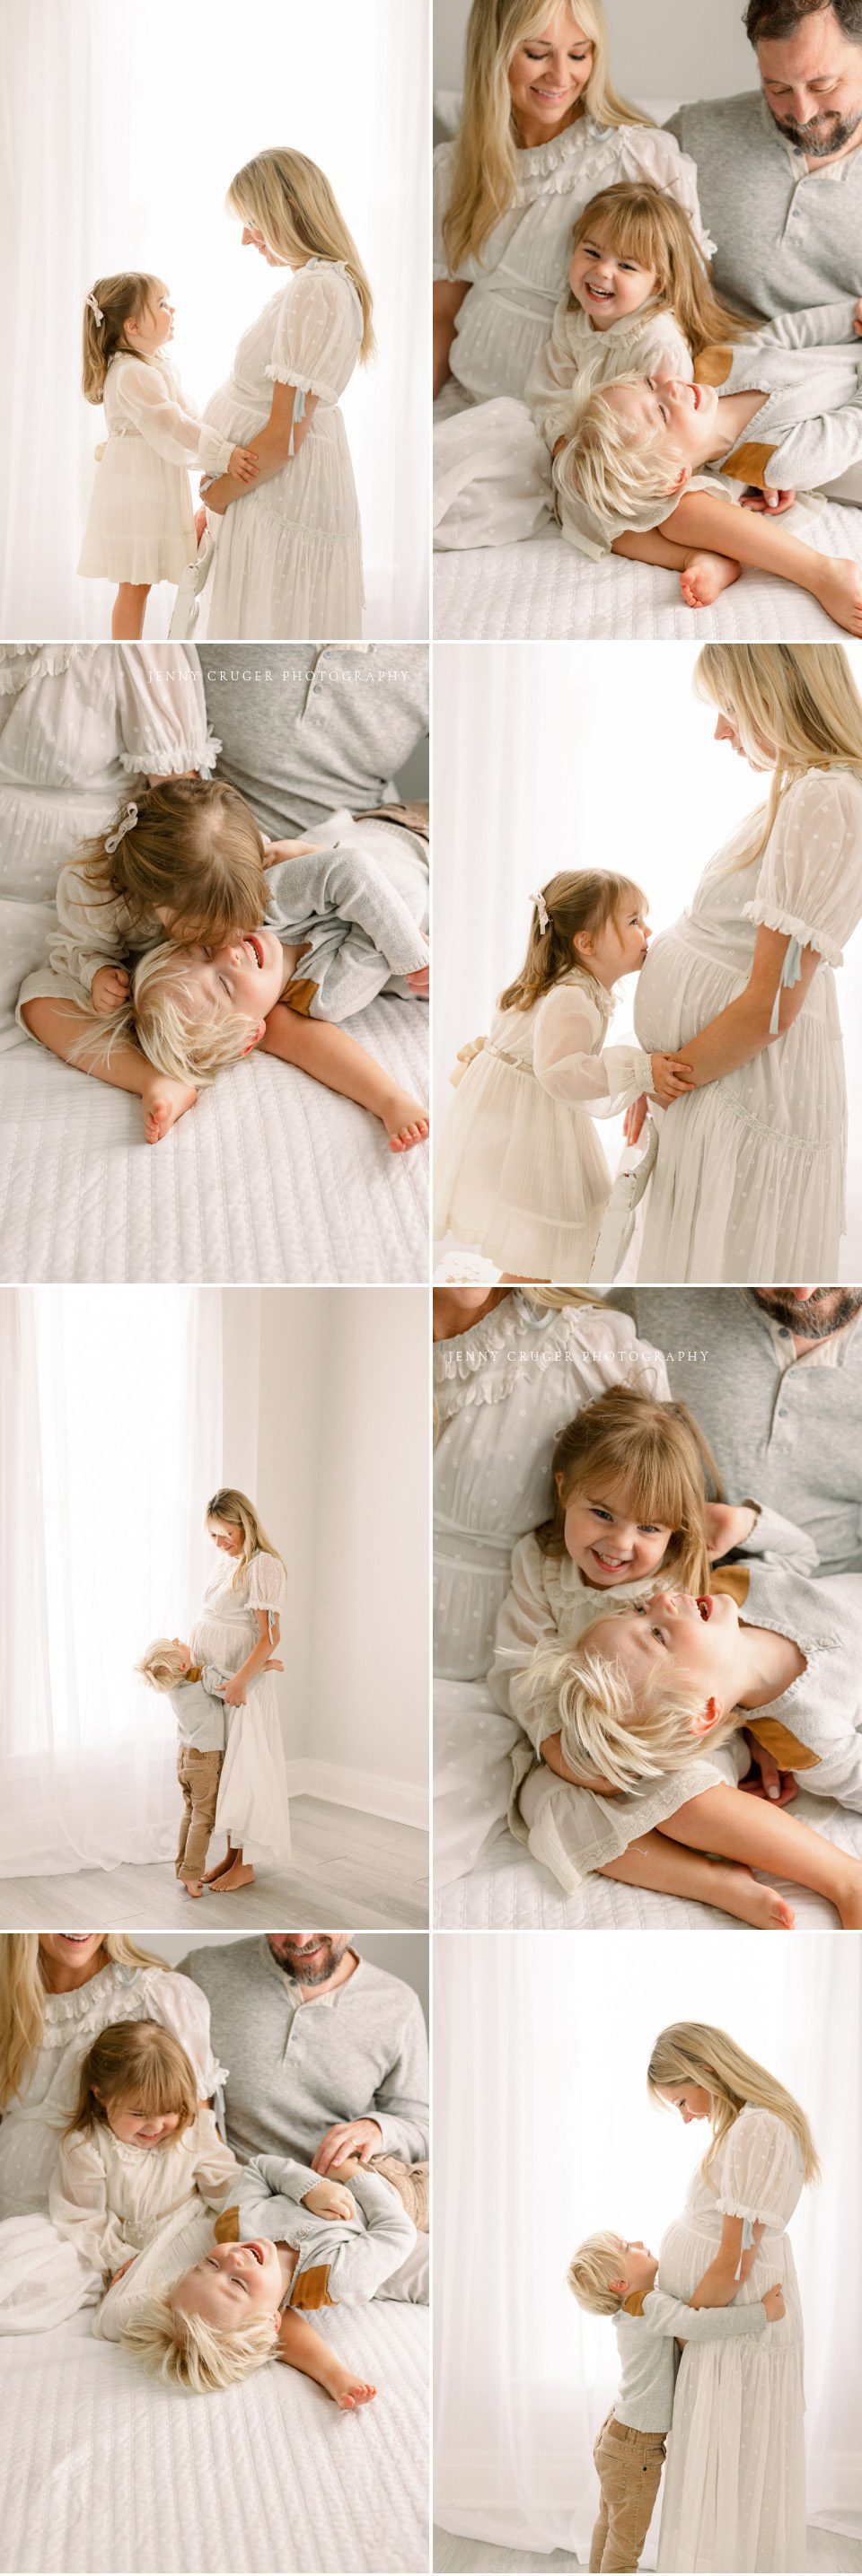 maternity session with older children snuggling on a white bed with mom